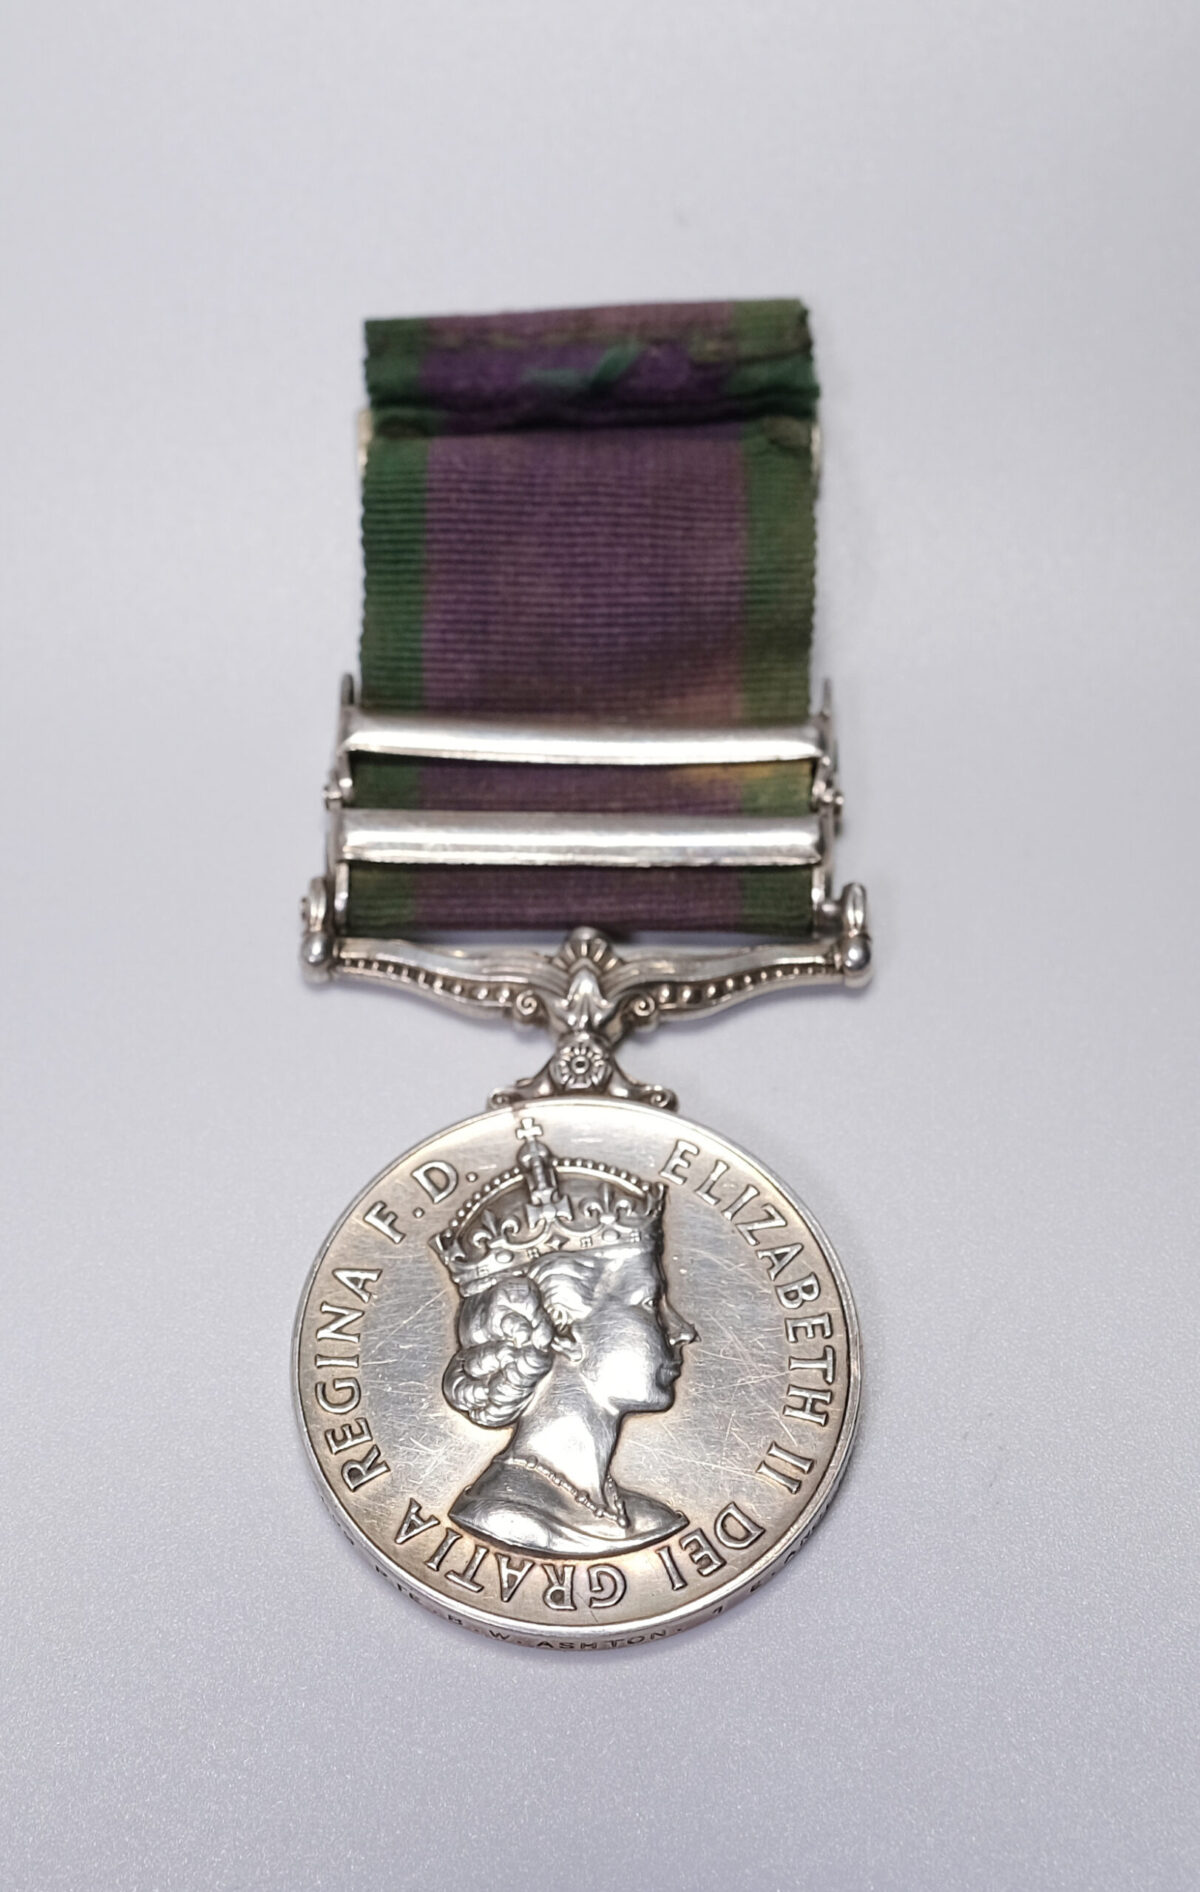 Campaign Medal and 2 Clasps South Arabia and Radfan 23933629 Private B W Ashton 1 East Anglian Regiment